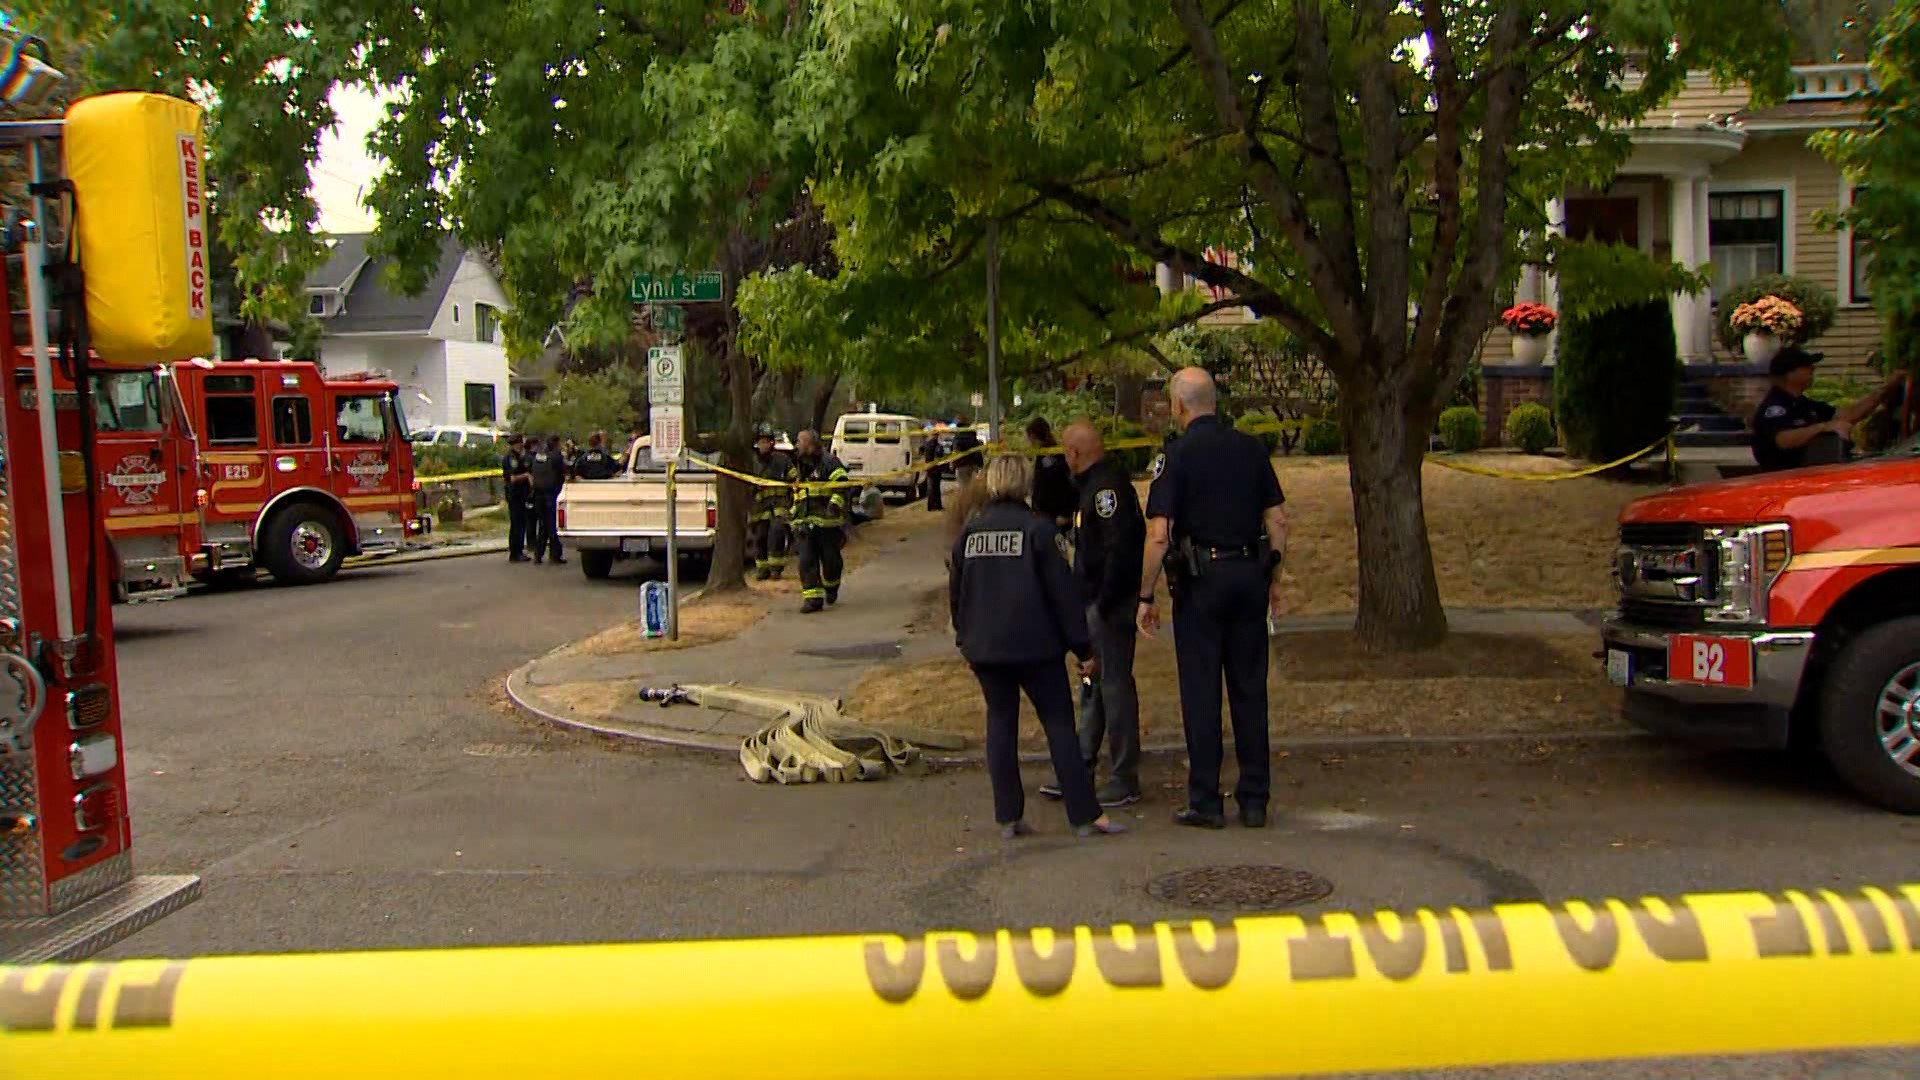 At least two people are deceased after a man  "in crisis" armed with a knife was encountered by Seattle police at a burning house in the Montlake neighborhood